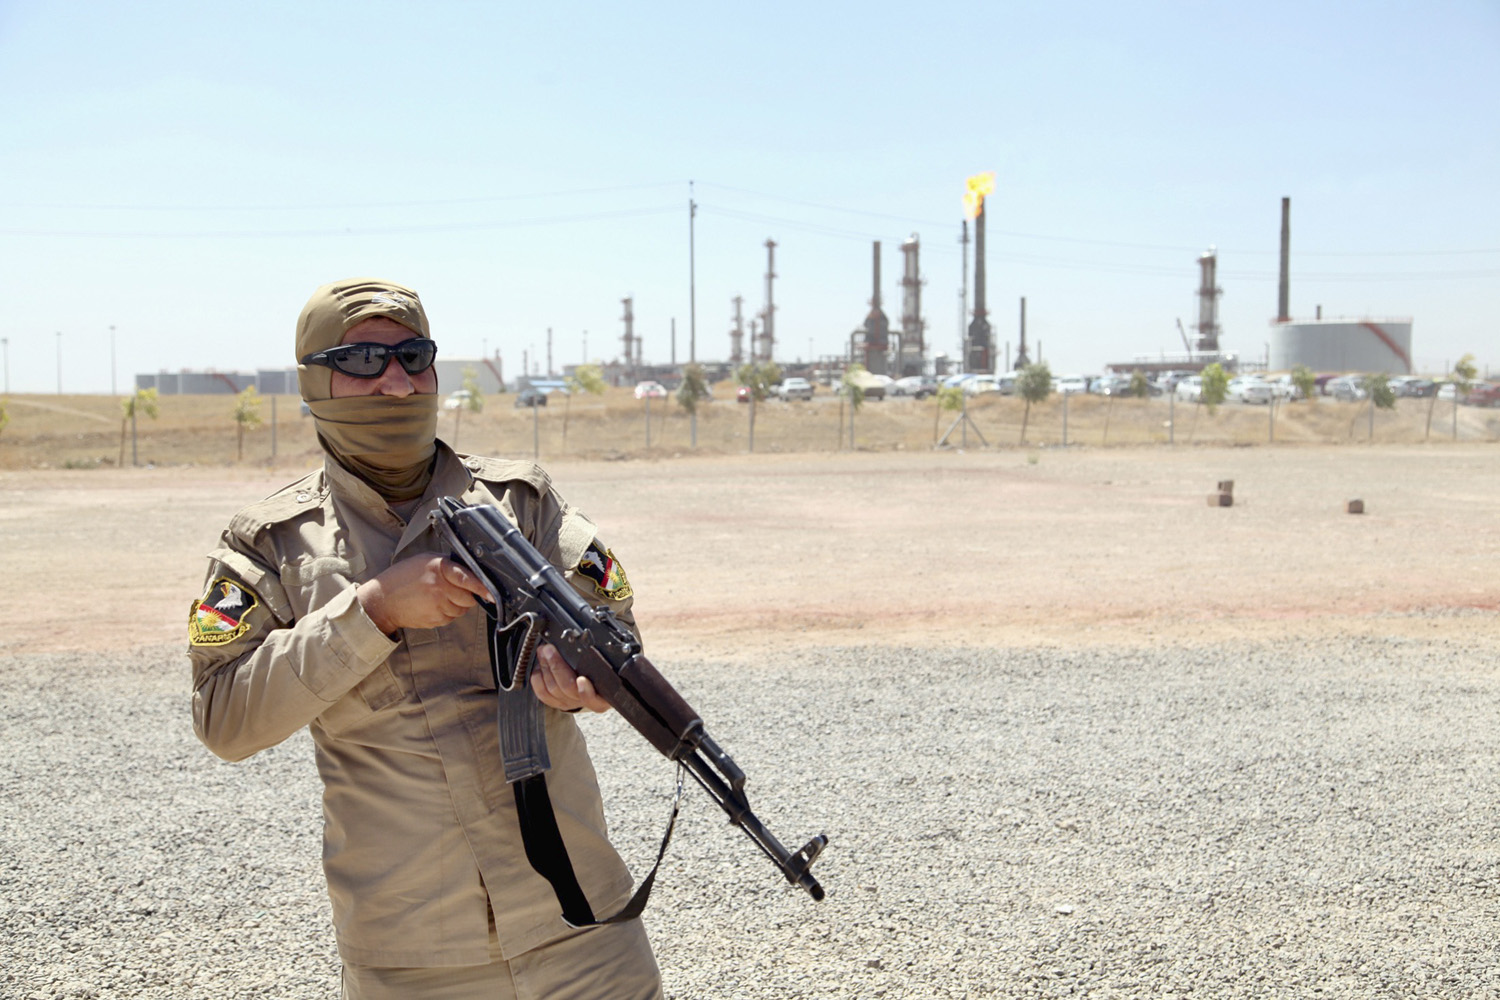 A member of Kurdish security forces takes up position with his weapon as he guards an oil refinery on the outskirts of Mosul